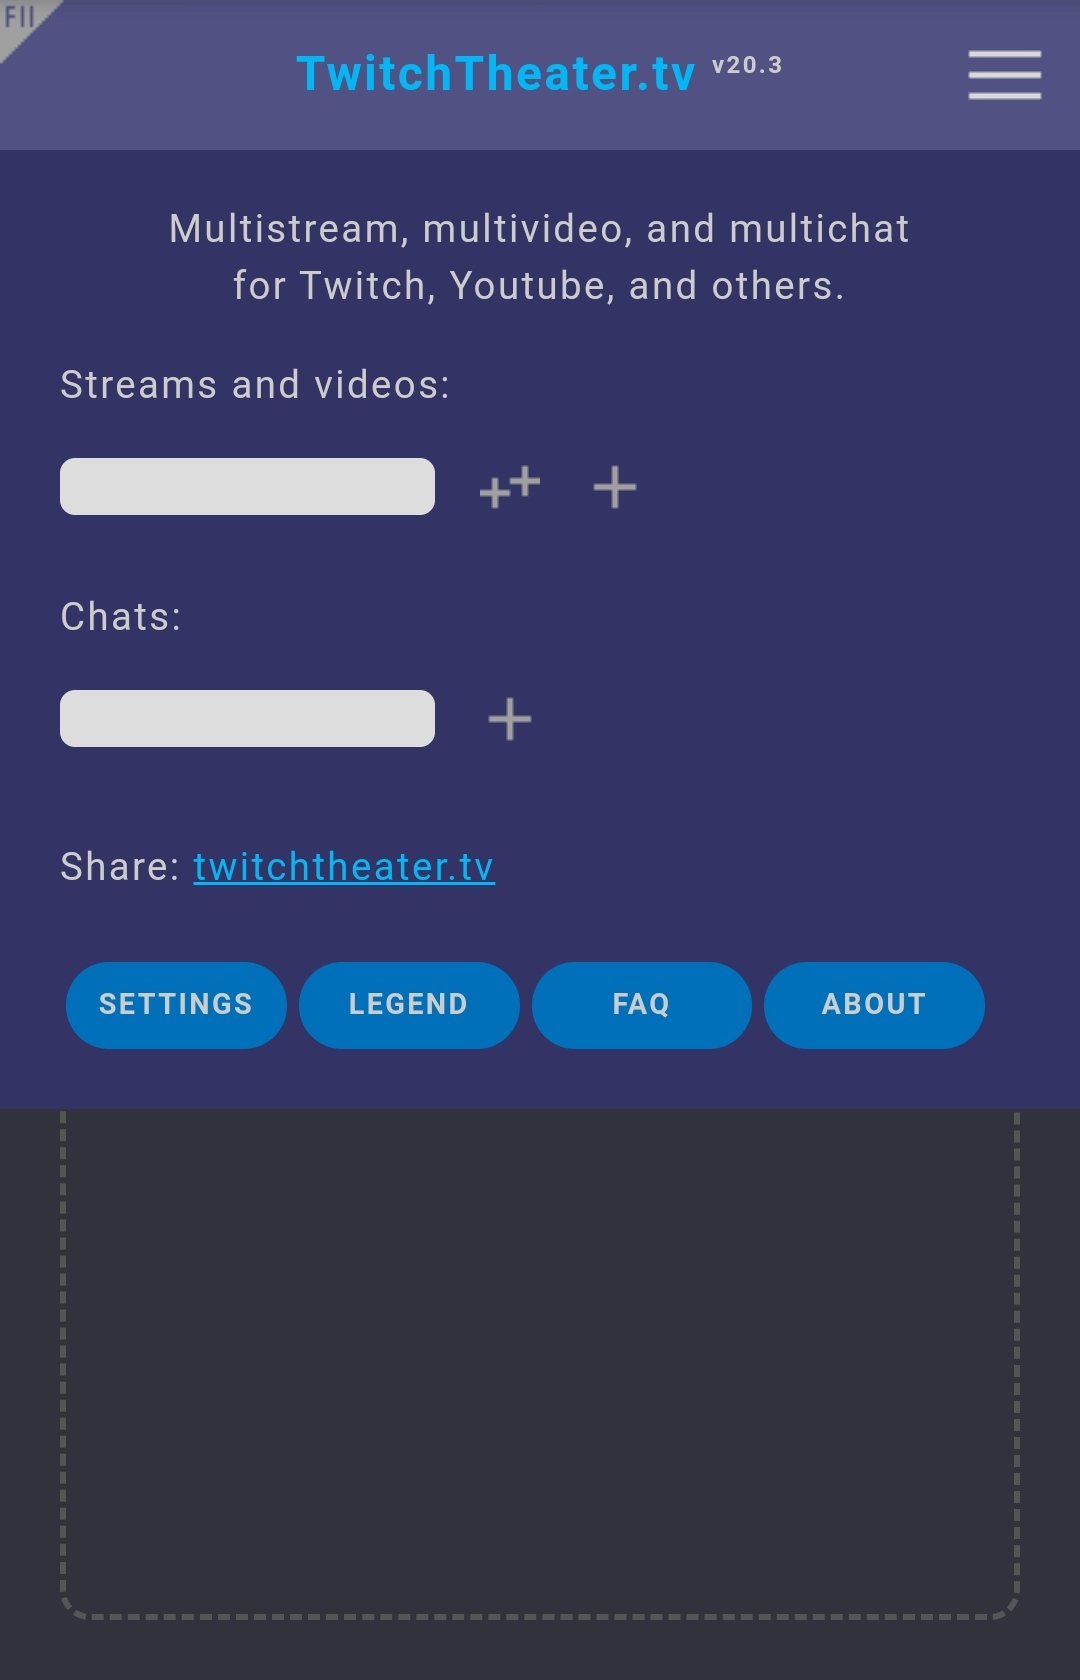 How to Watch Twitch and YouTube Streams Together